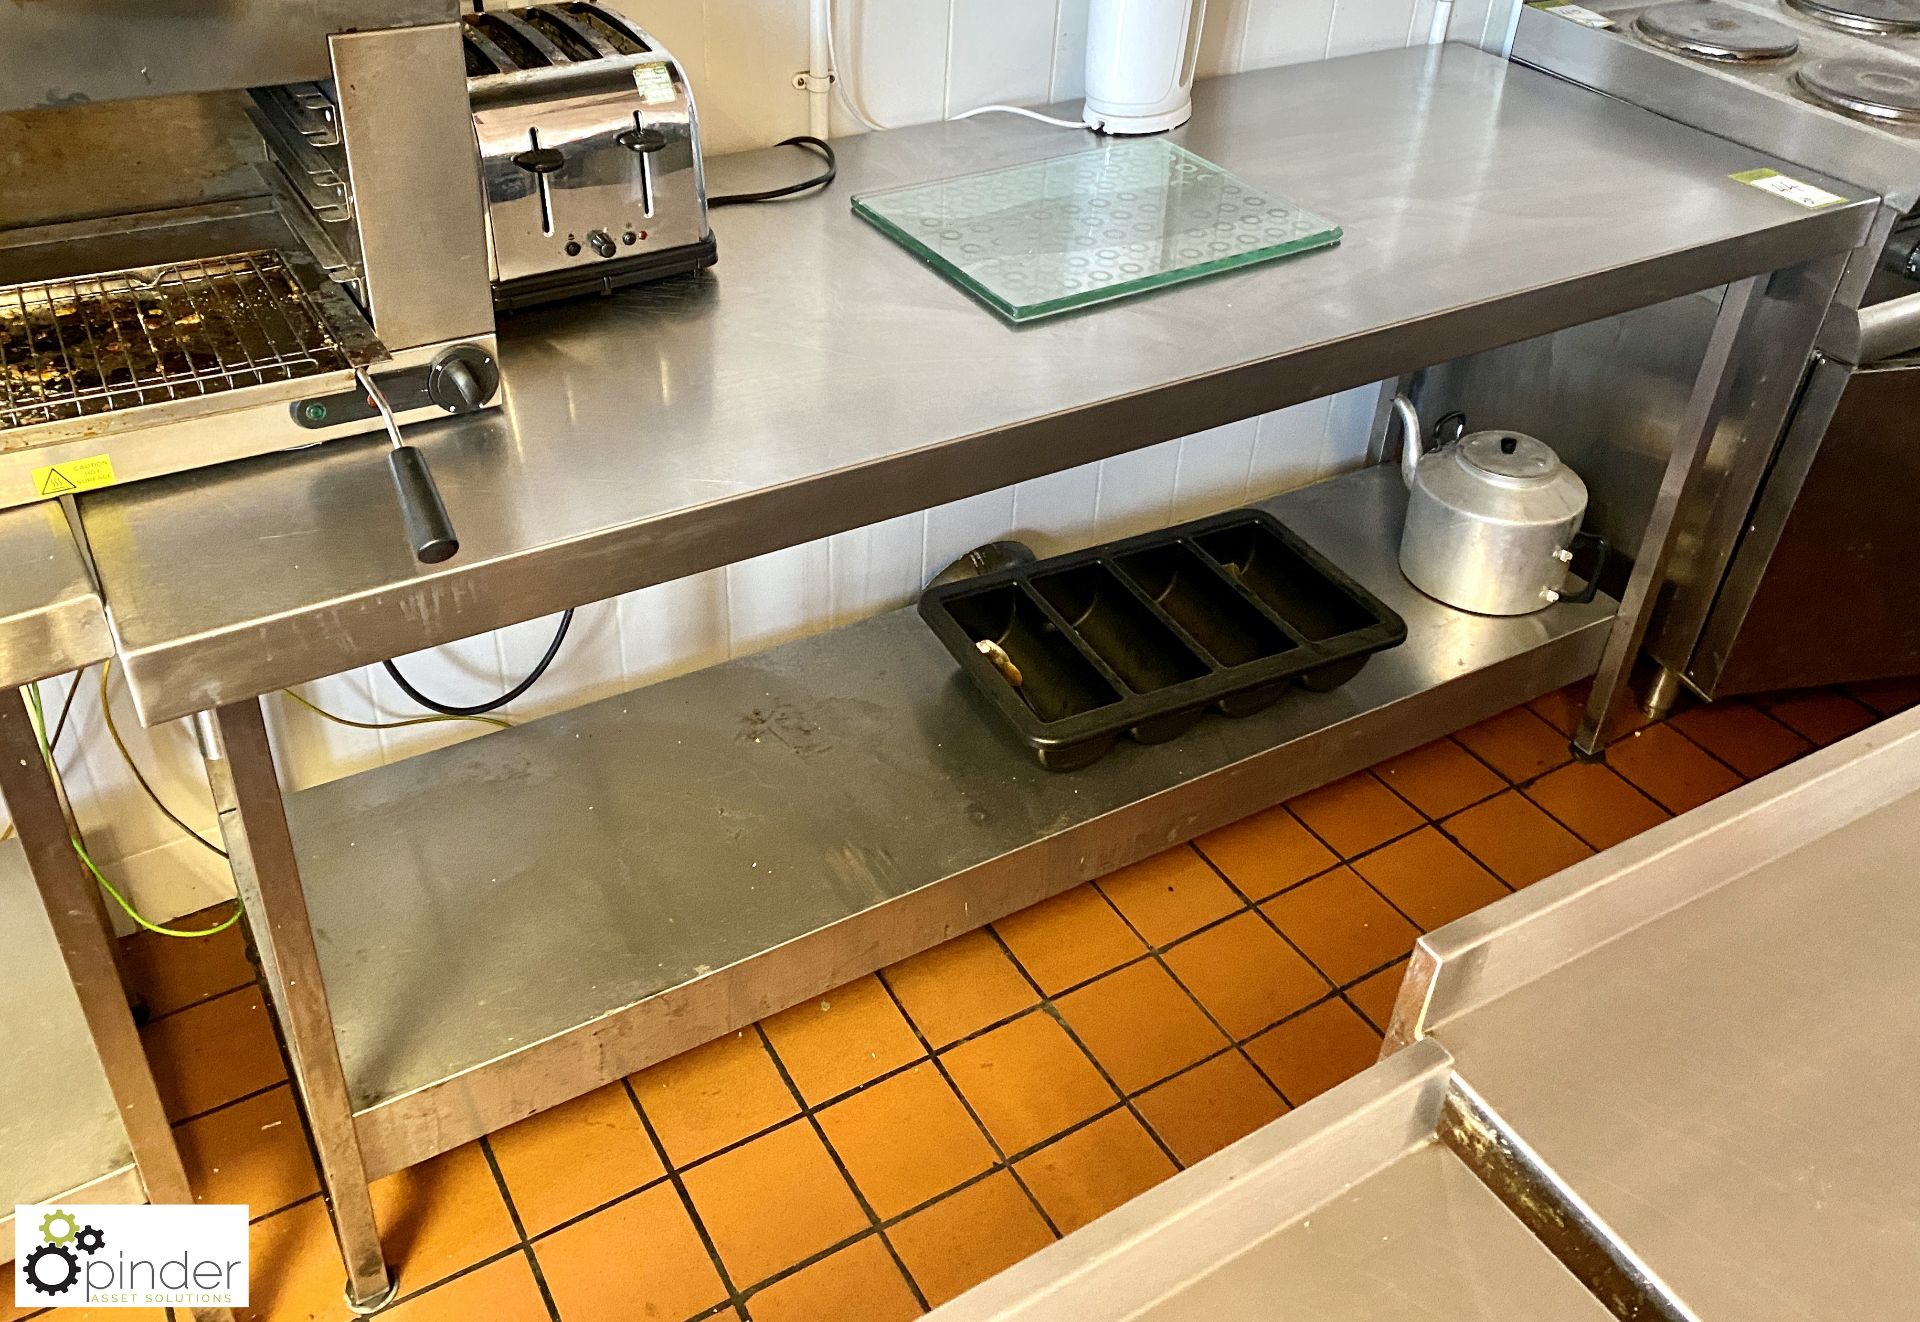 Stainless steel Preparation Table, 1800mm x 650mm x 830mm, with under shelf